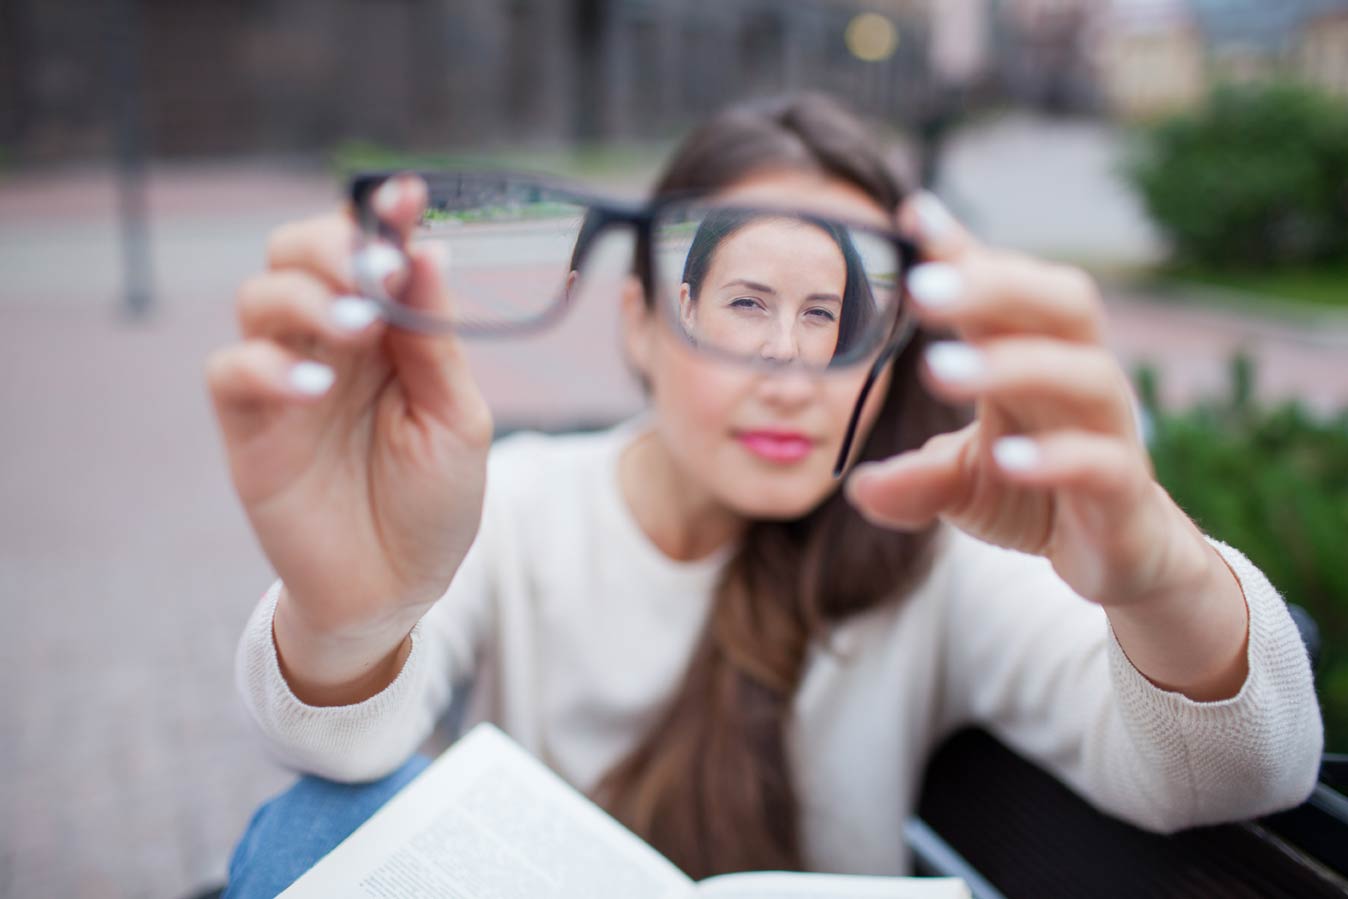 A woman holding glasses that make her face appear smaller through the lens